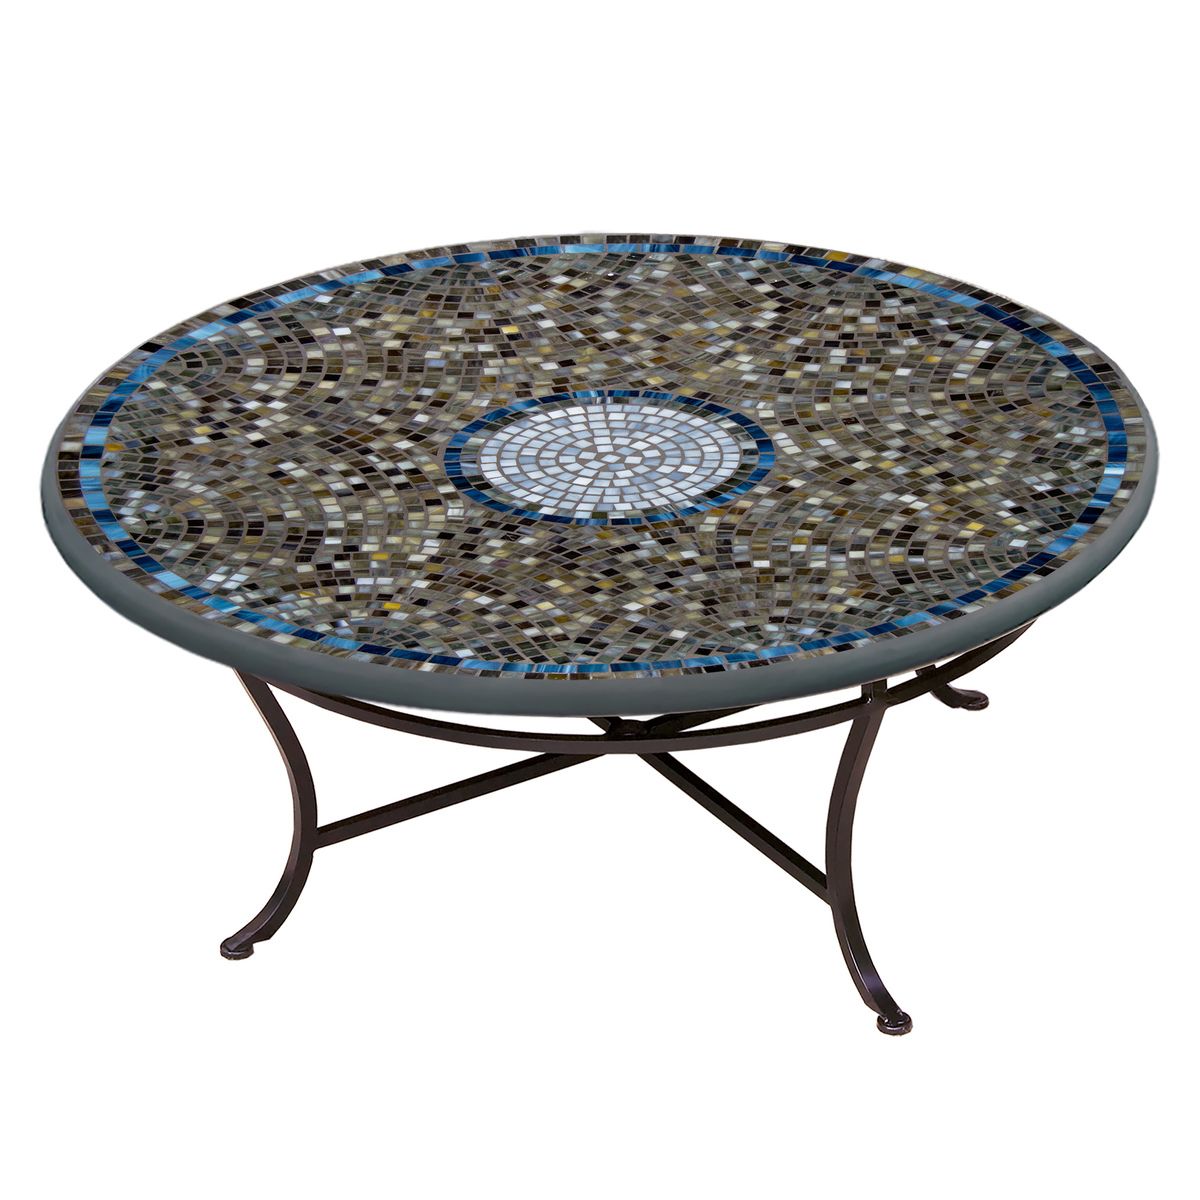 Slate Glass Mosaic Coffee Table-Iron Accents